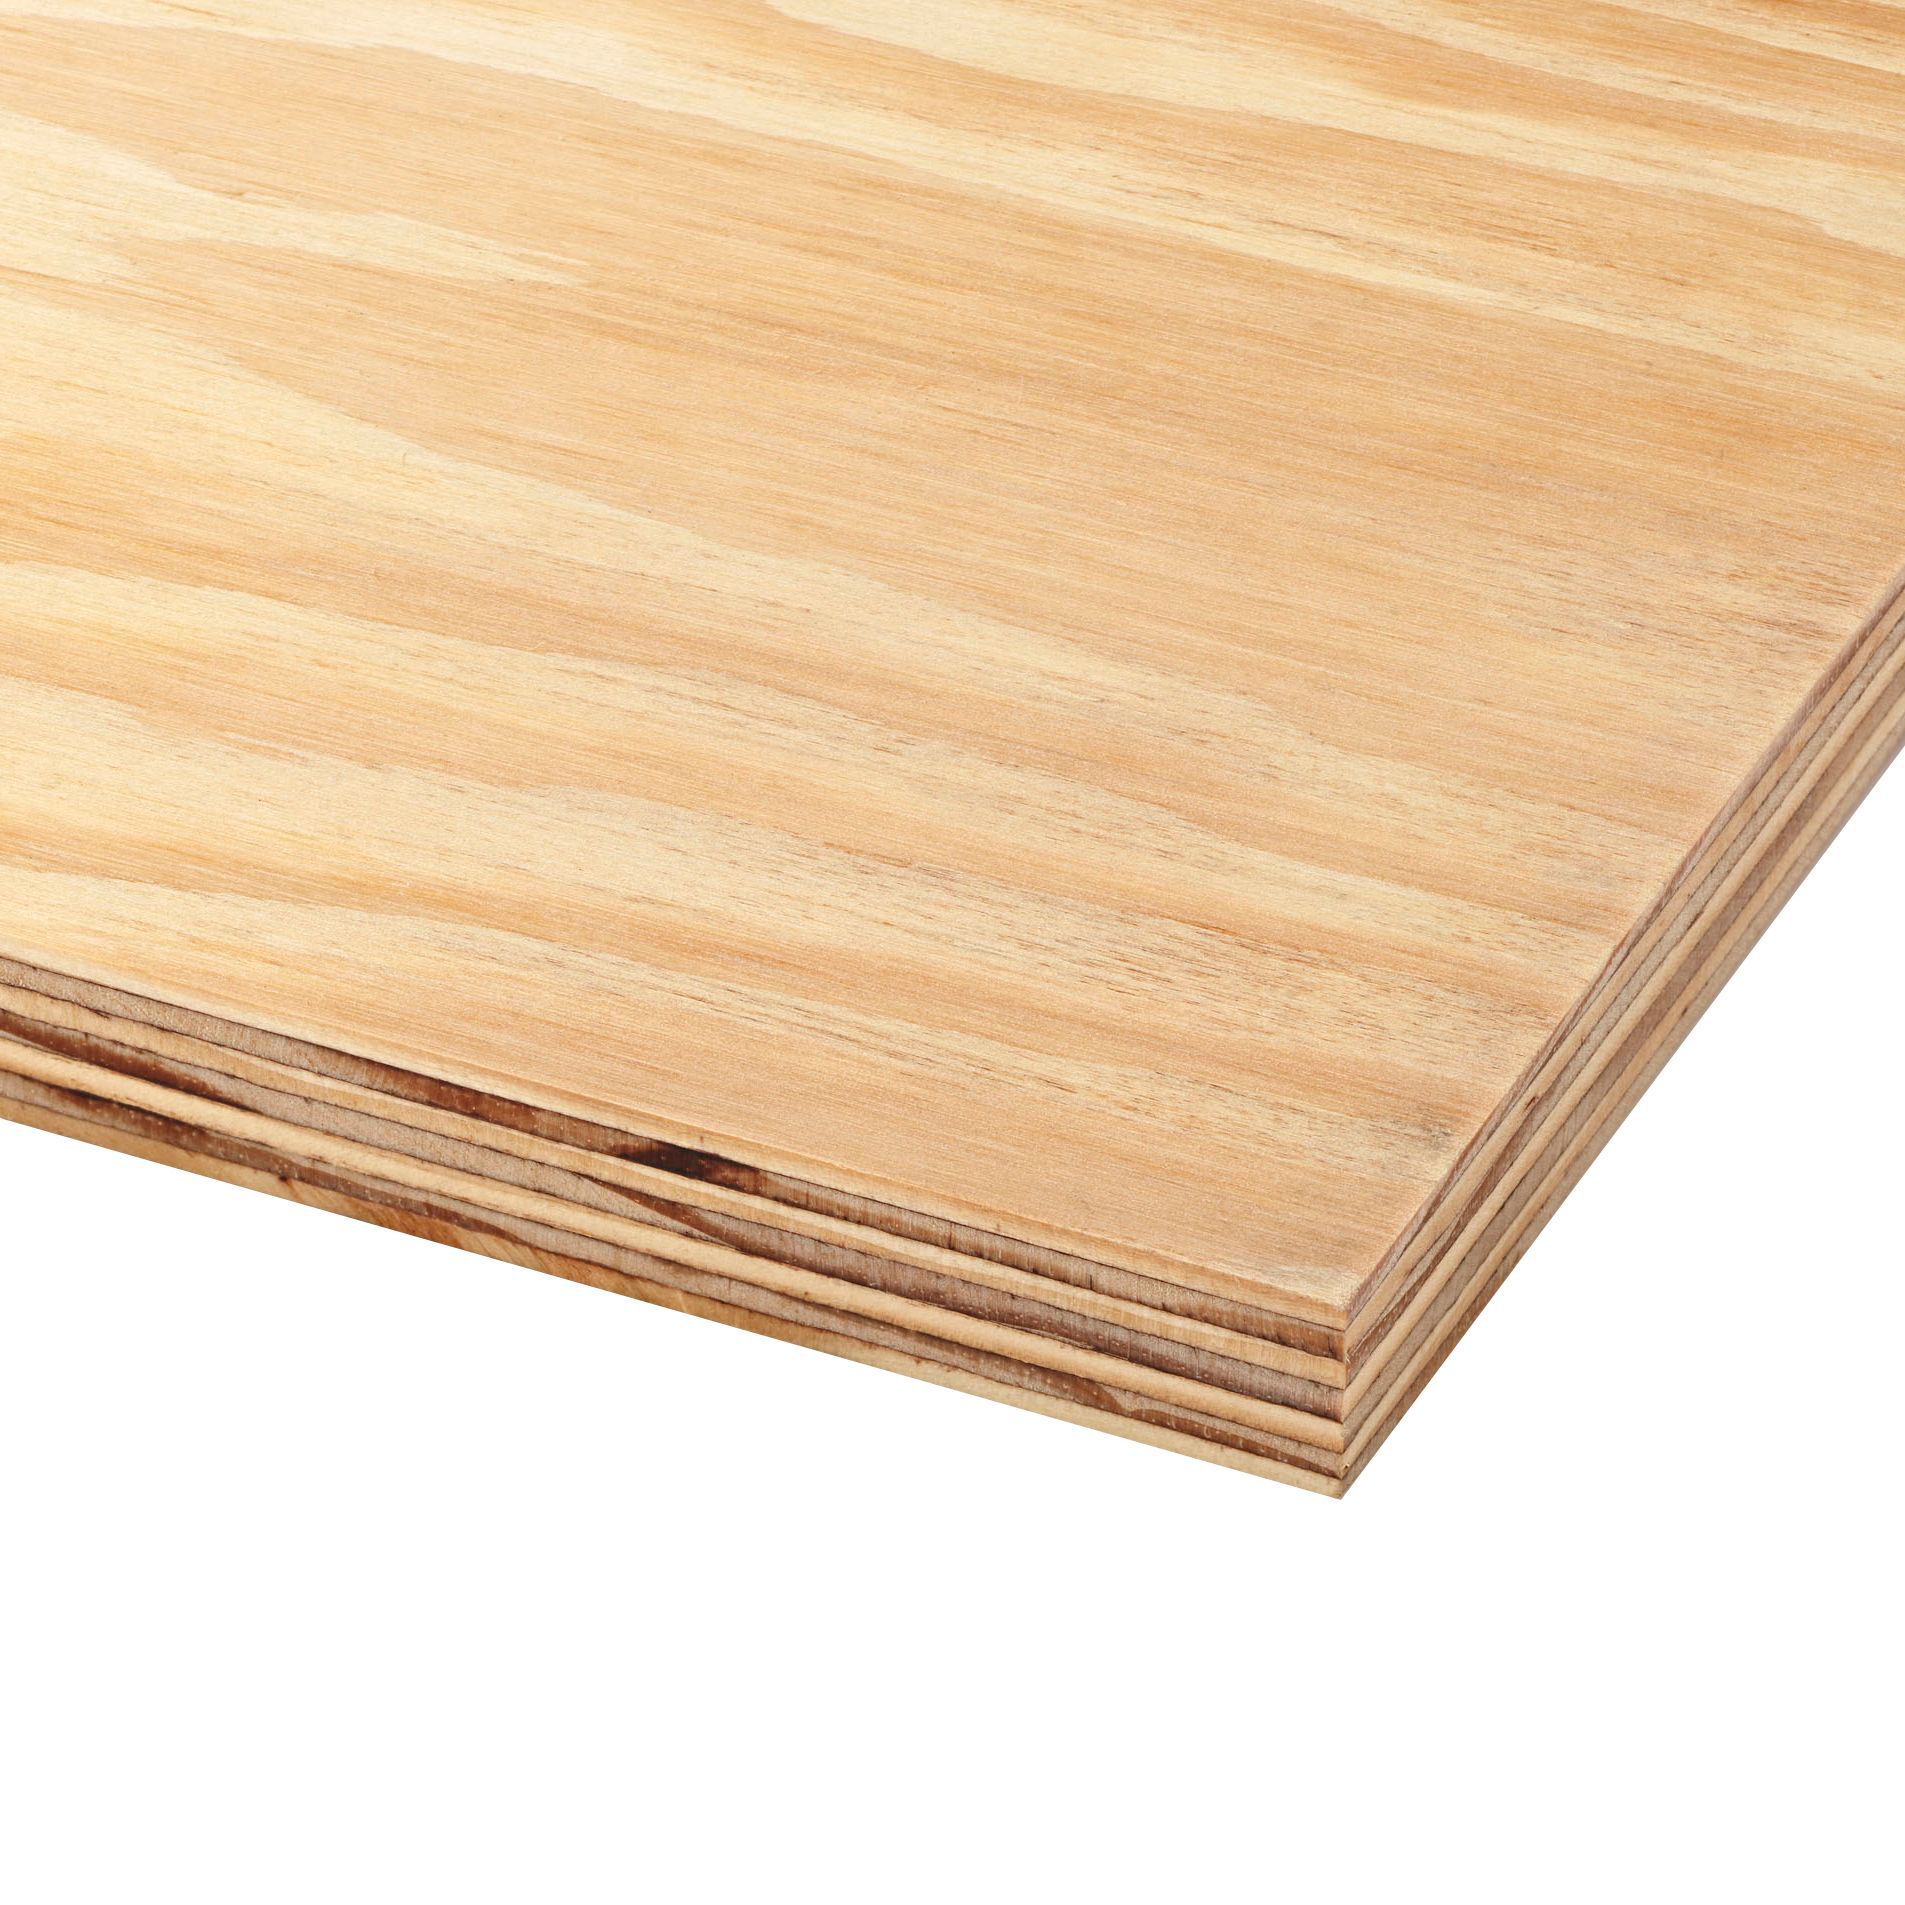 Smooth Softwood Plywood Board  L 2 44m W 1 22m T 18mm 